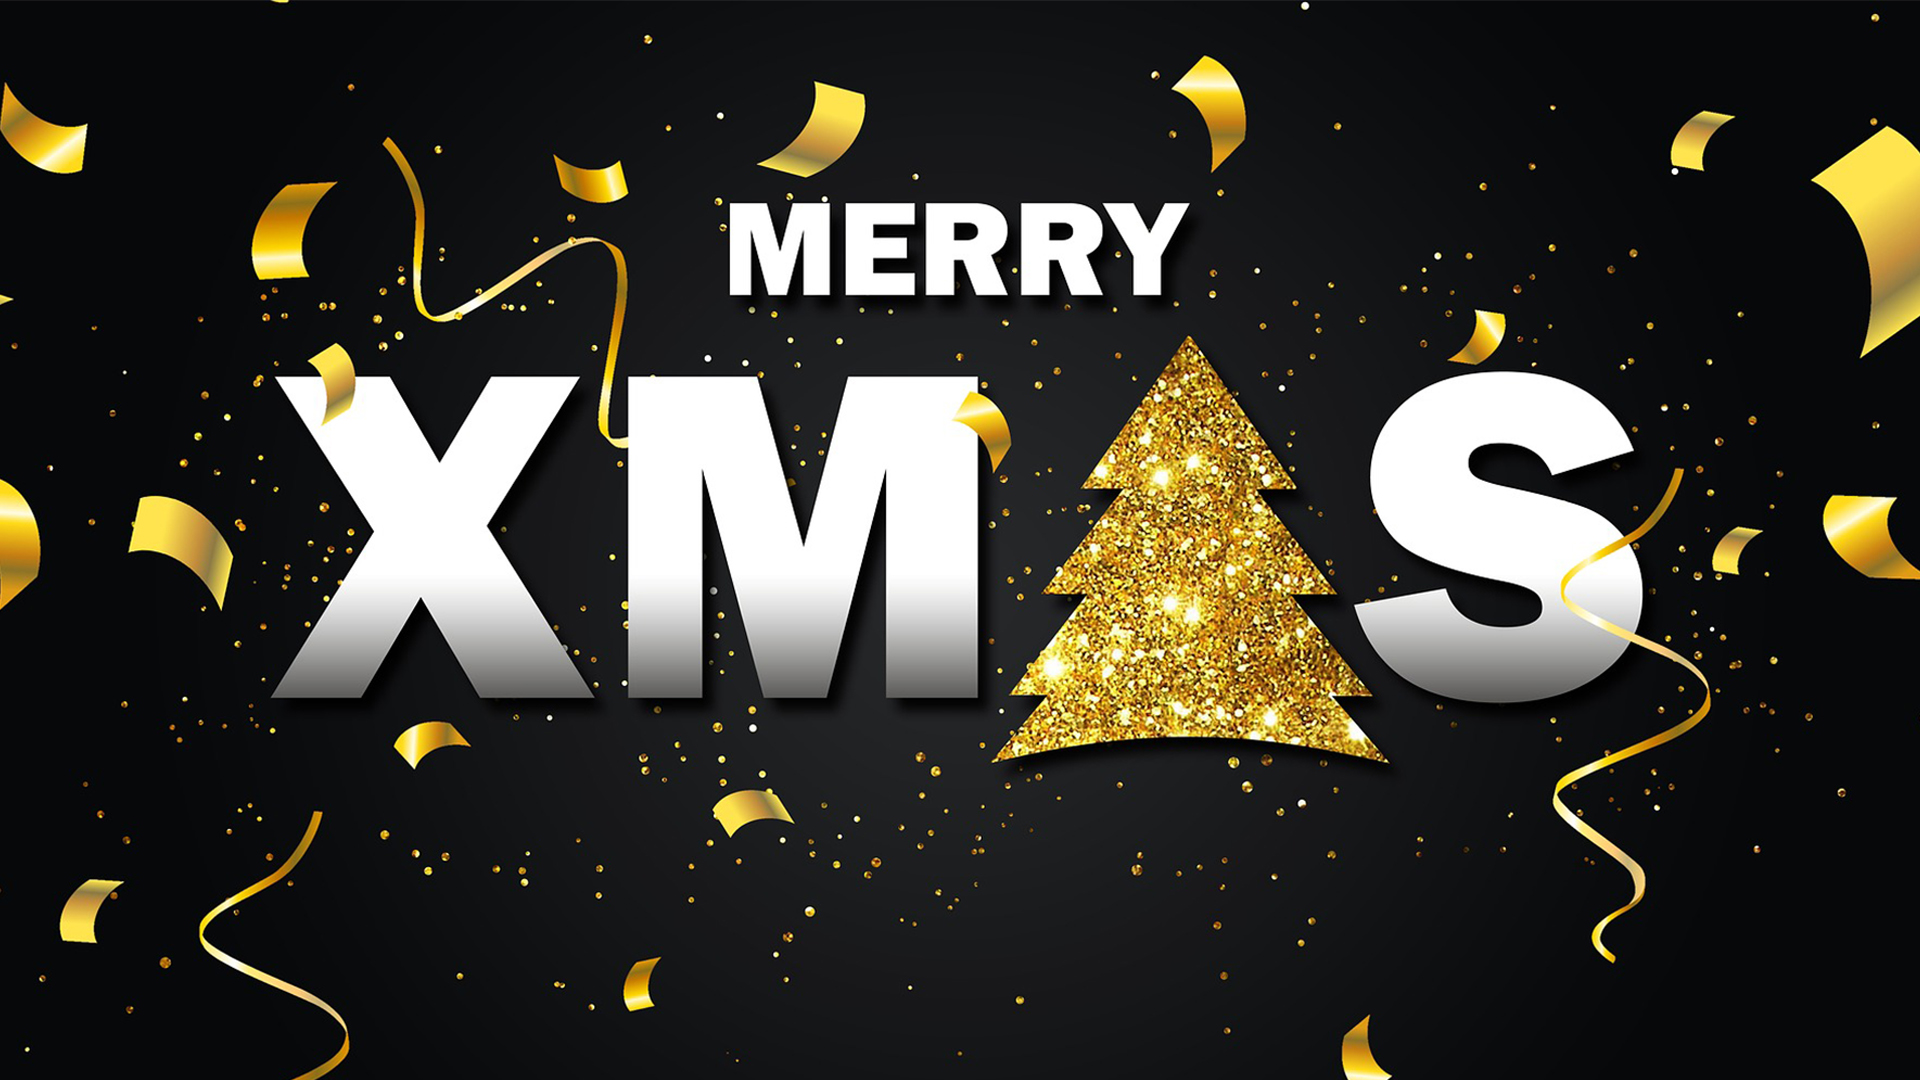 Black background with gold confetti. Merry XMAS is written across the middle of the screen with a gold tree replacing the a in xmas